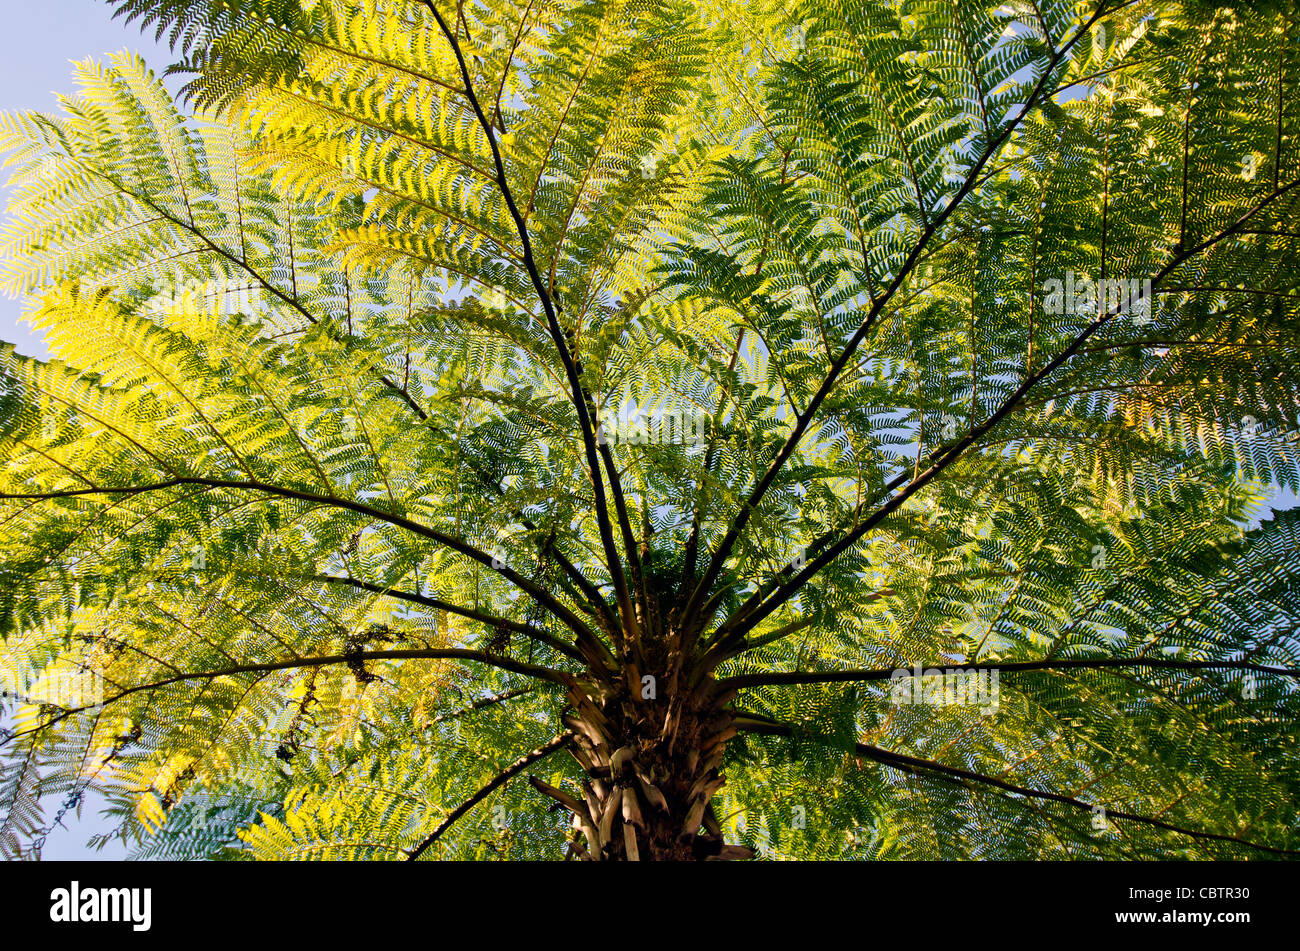 Closeup of tree fern branches seen from underneath Stock Photo